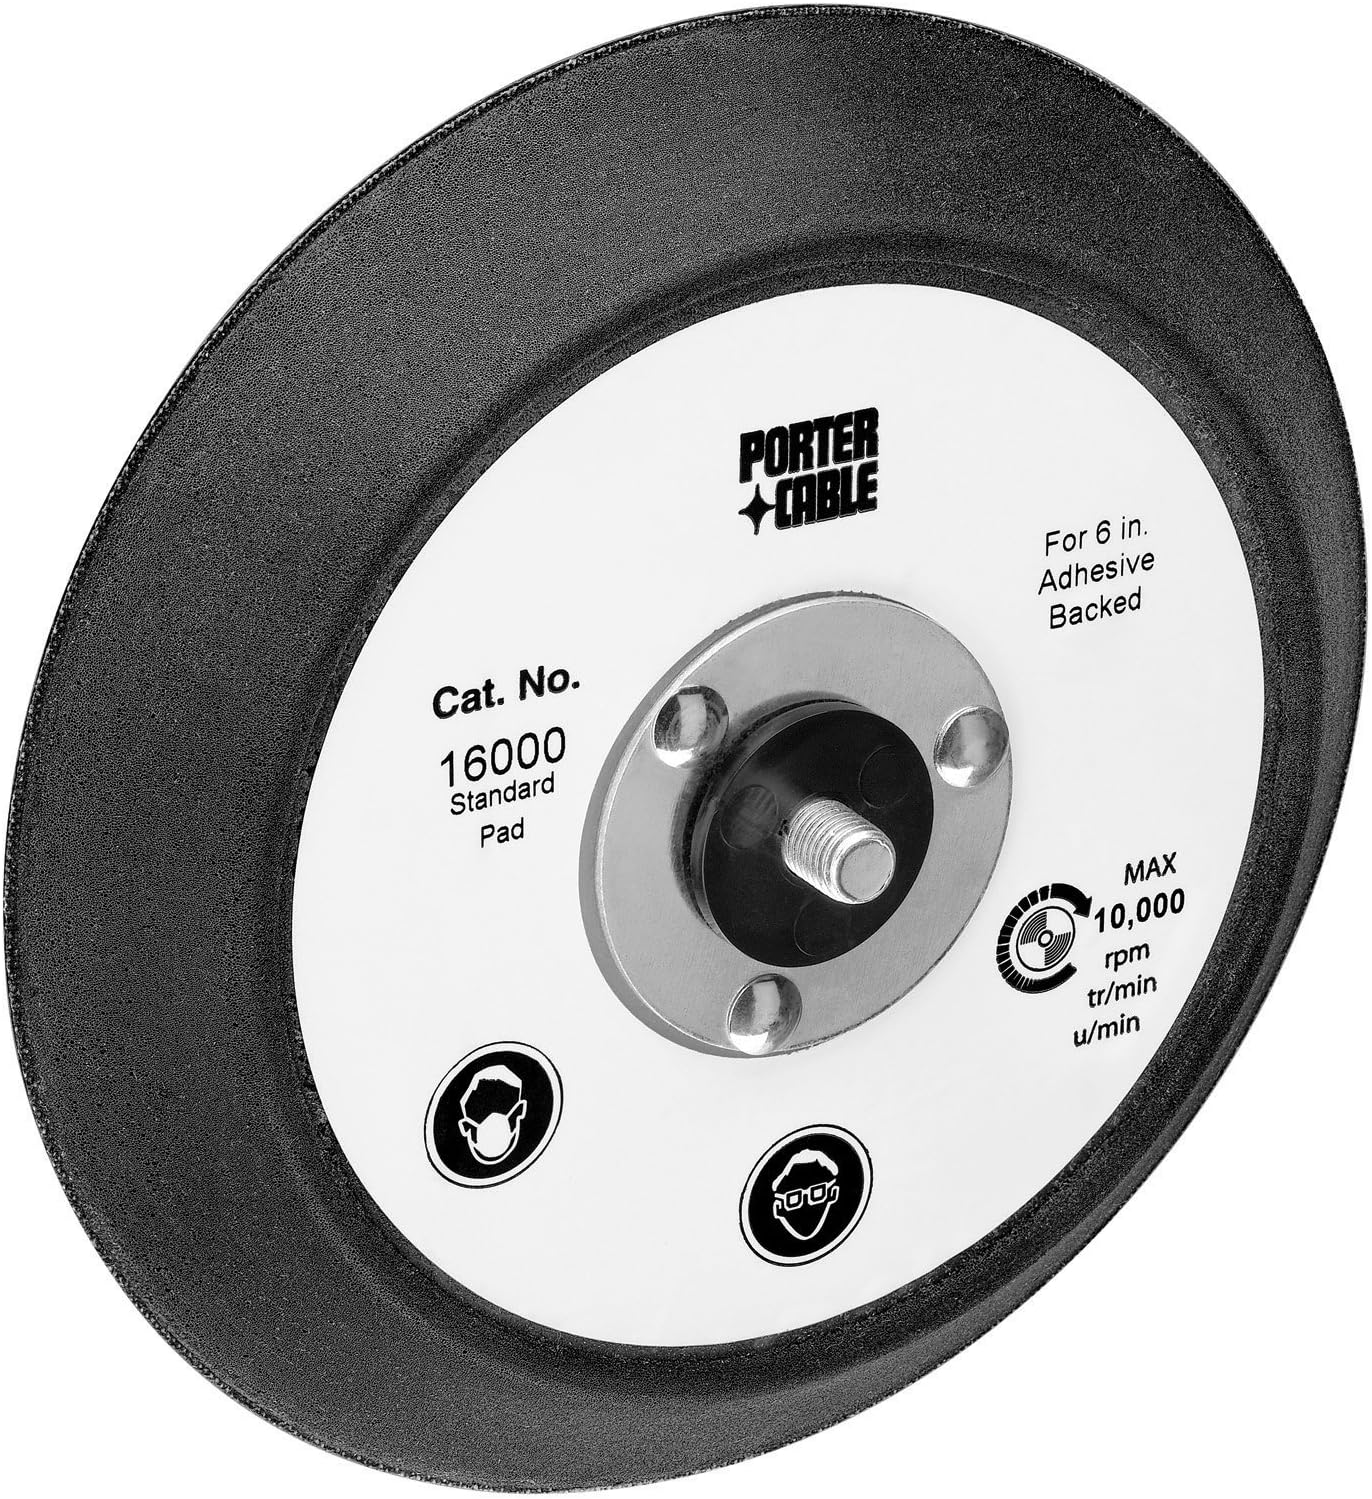 PORTER-CABLE 16000 6 In Standard Pad for 7336 and [...]